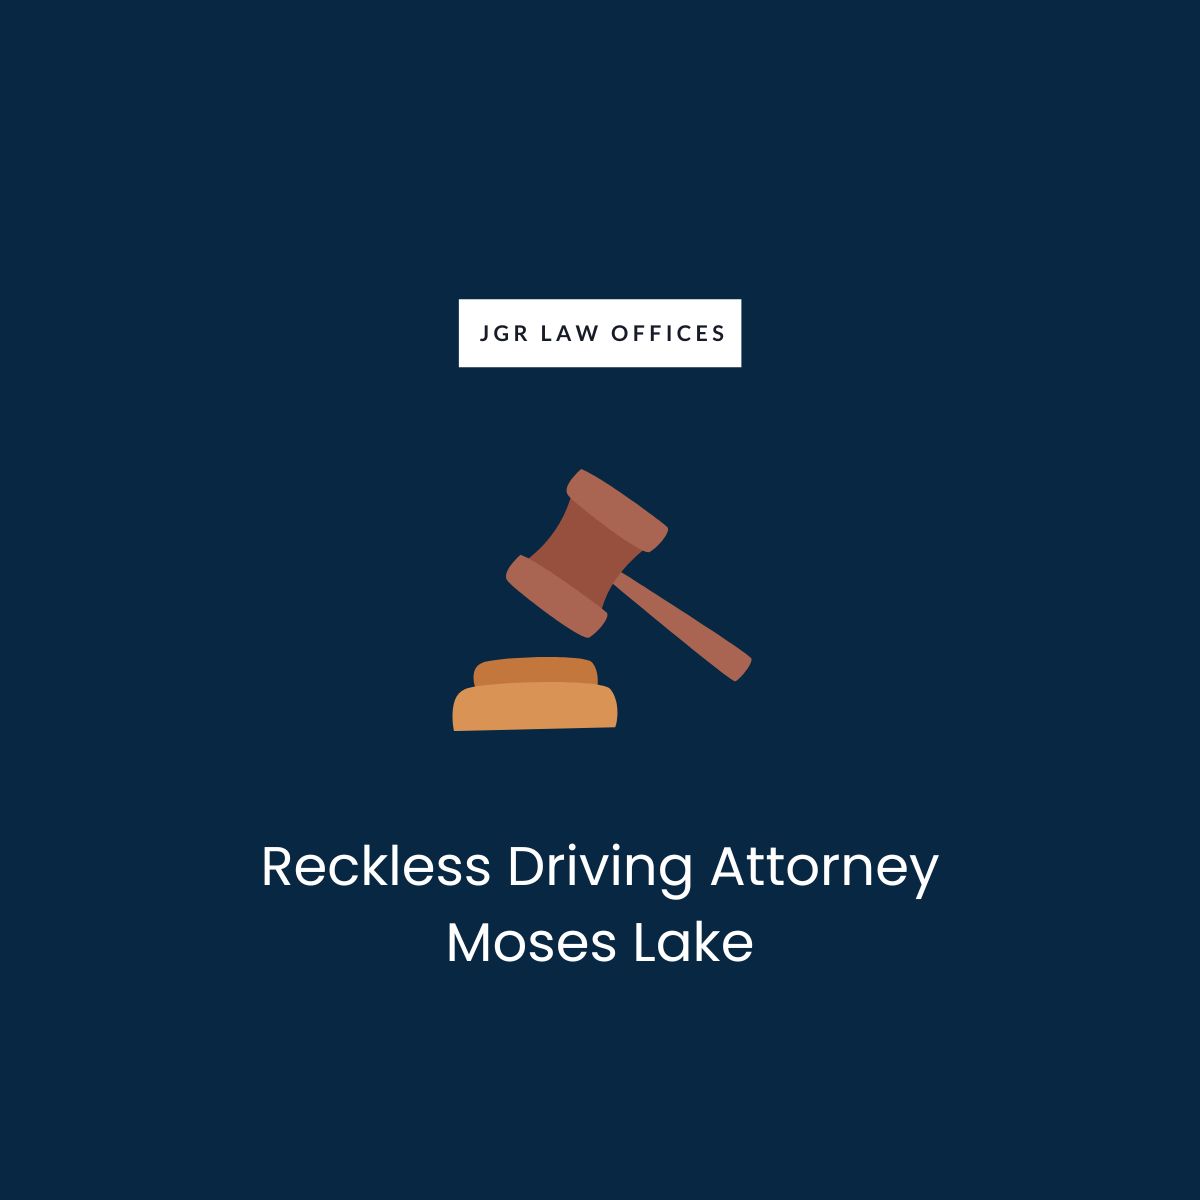 Reckless Driving Attorney Moses Lake Reckless Driving